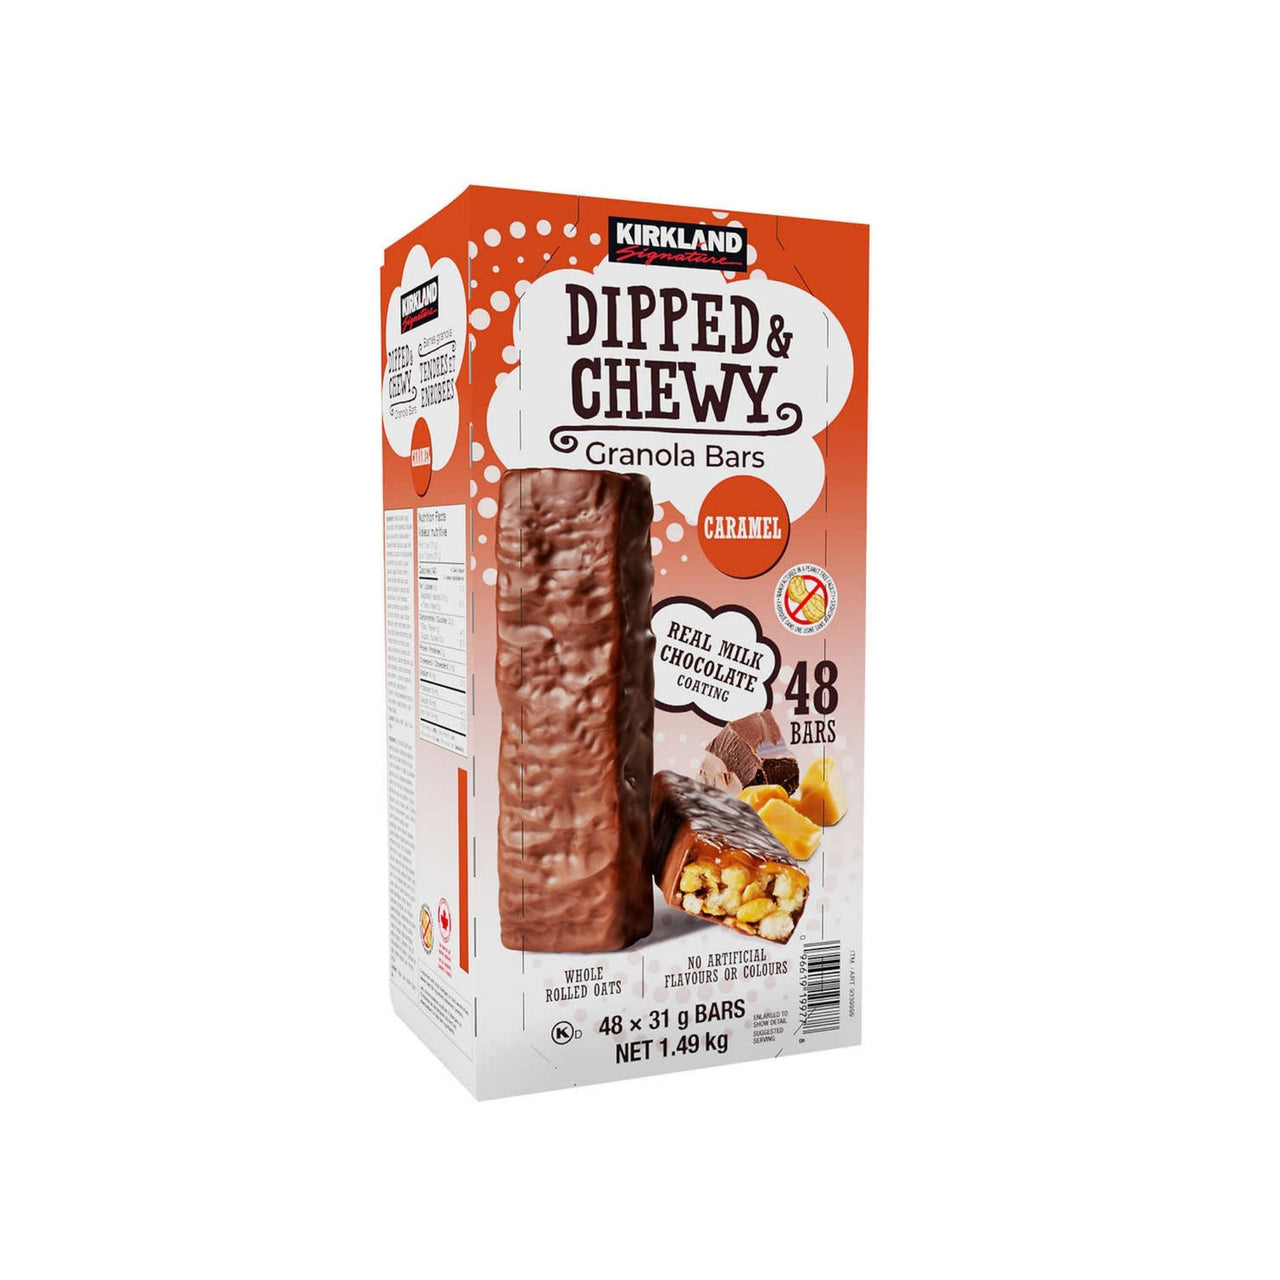 Image of Kirkland Signature Dipped and Chewy Granola Bar, 1.49kg, 48-count - 1 x 1.49 Kilos